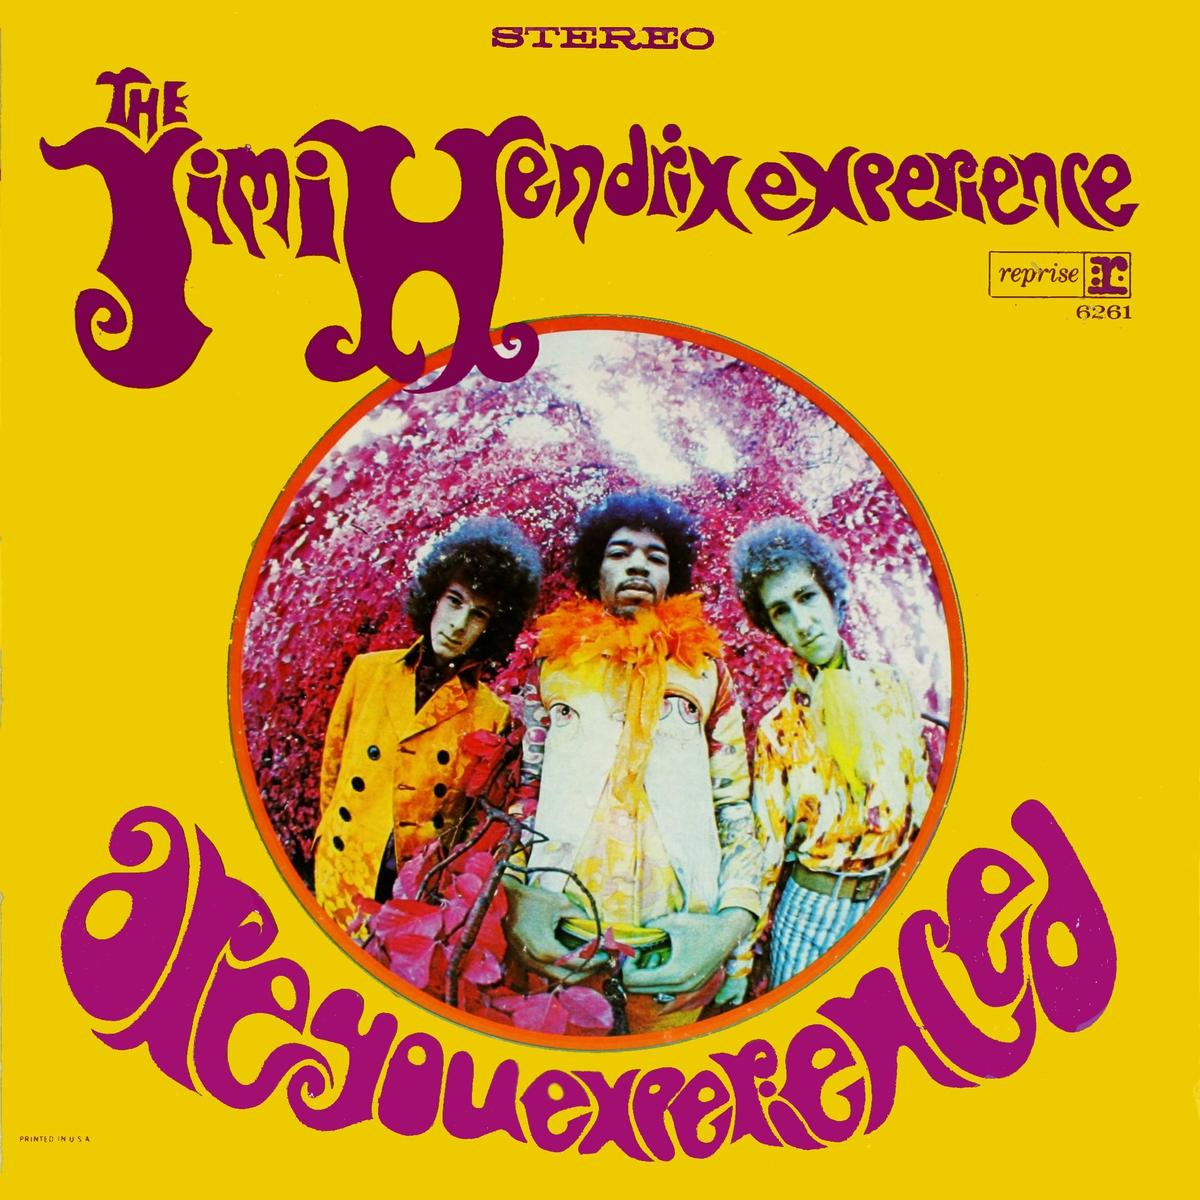 Are You Experienced - US cover-edit